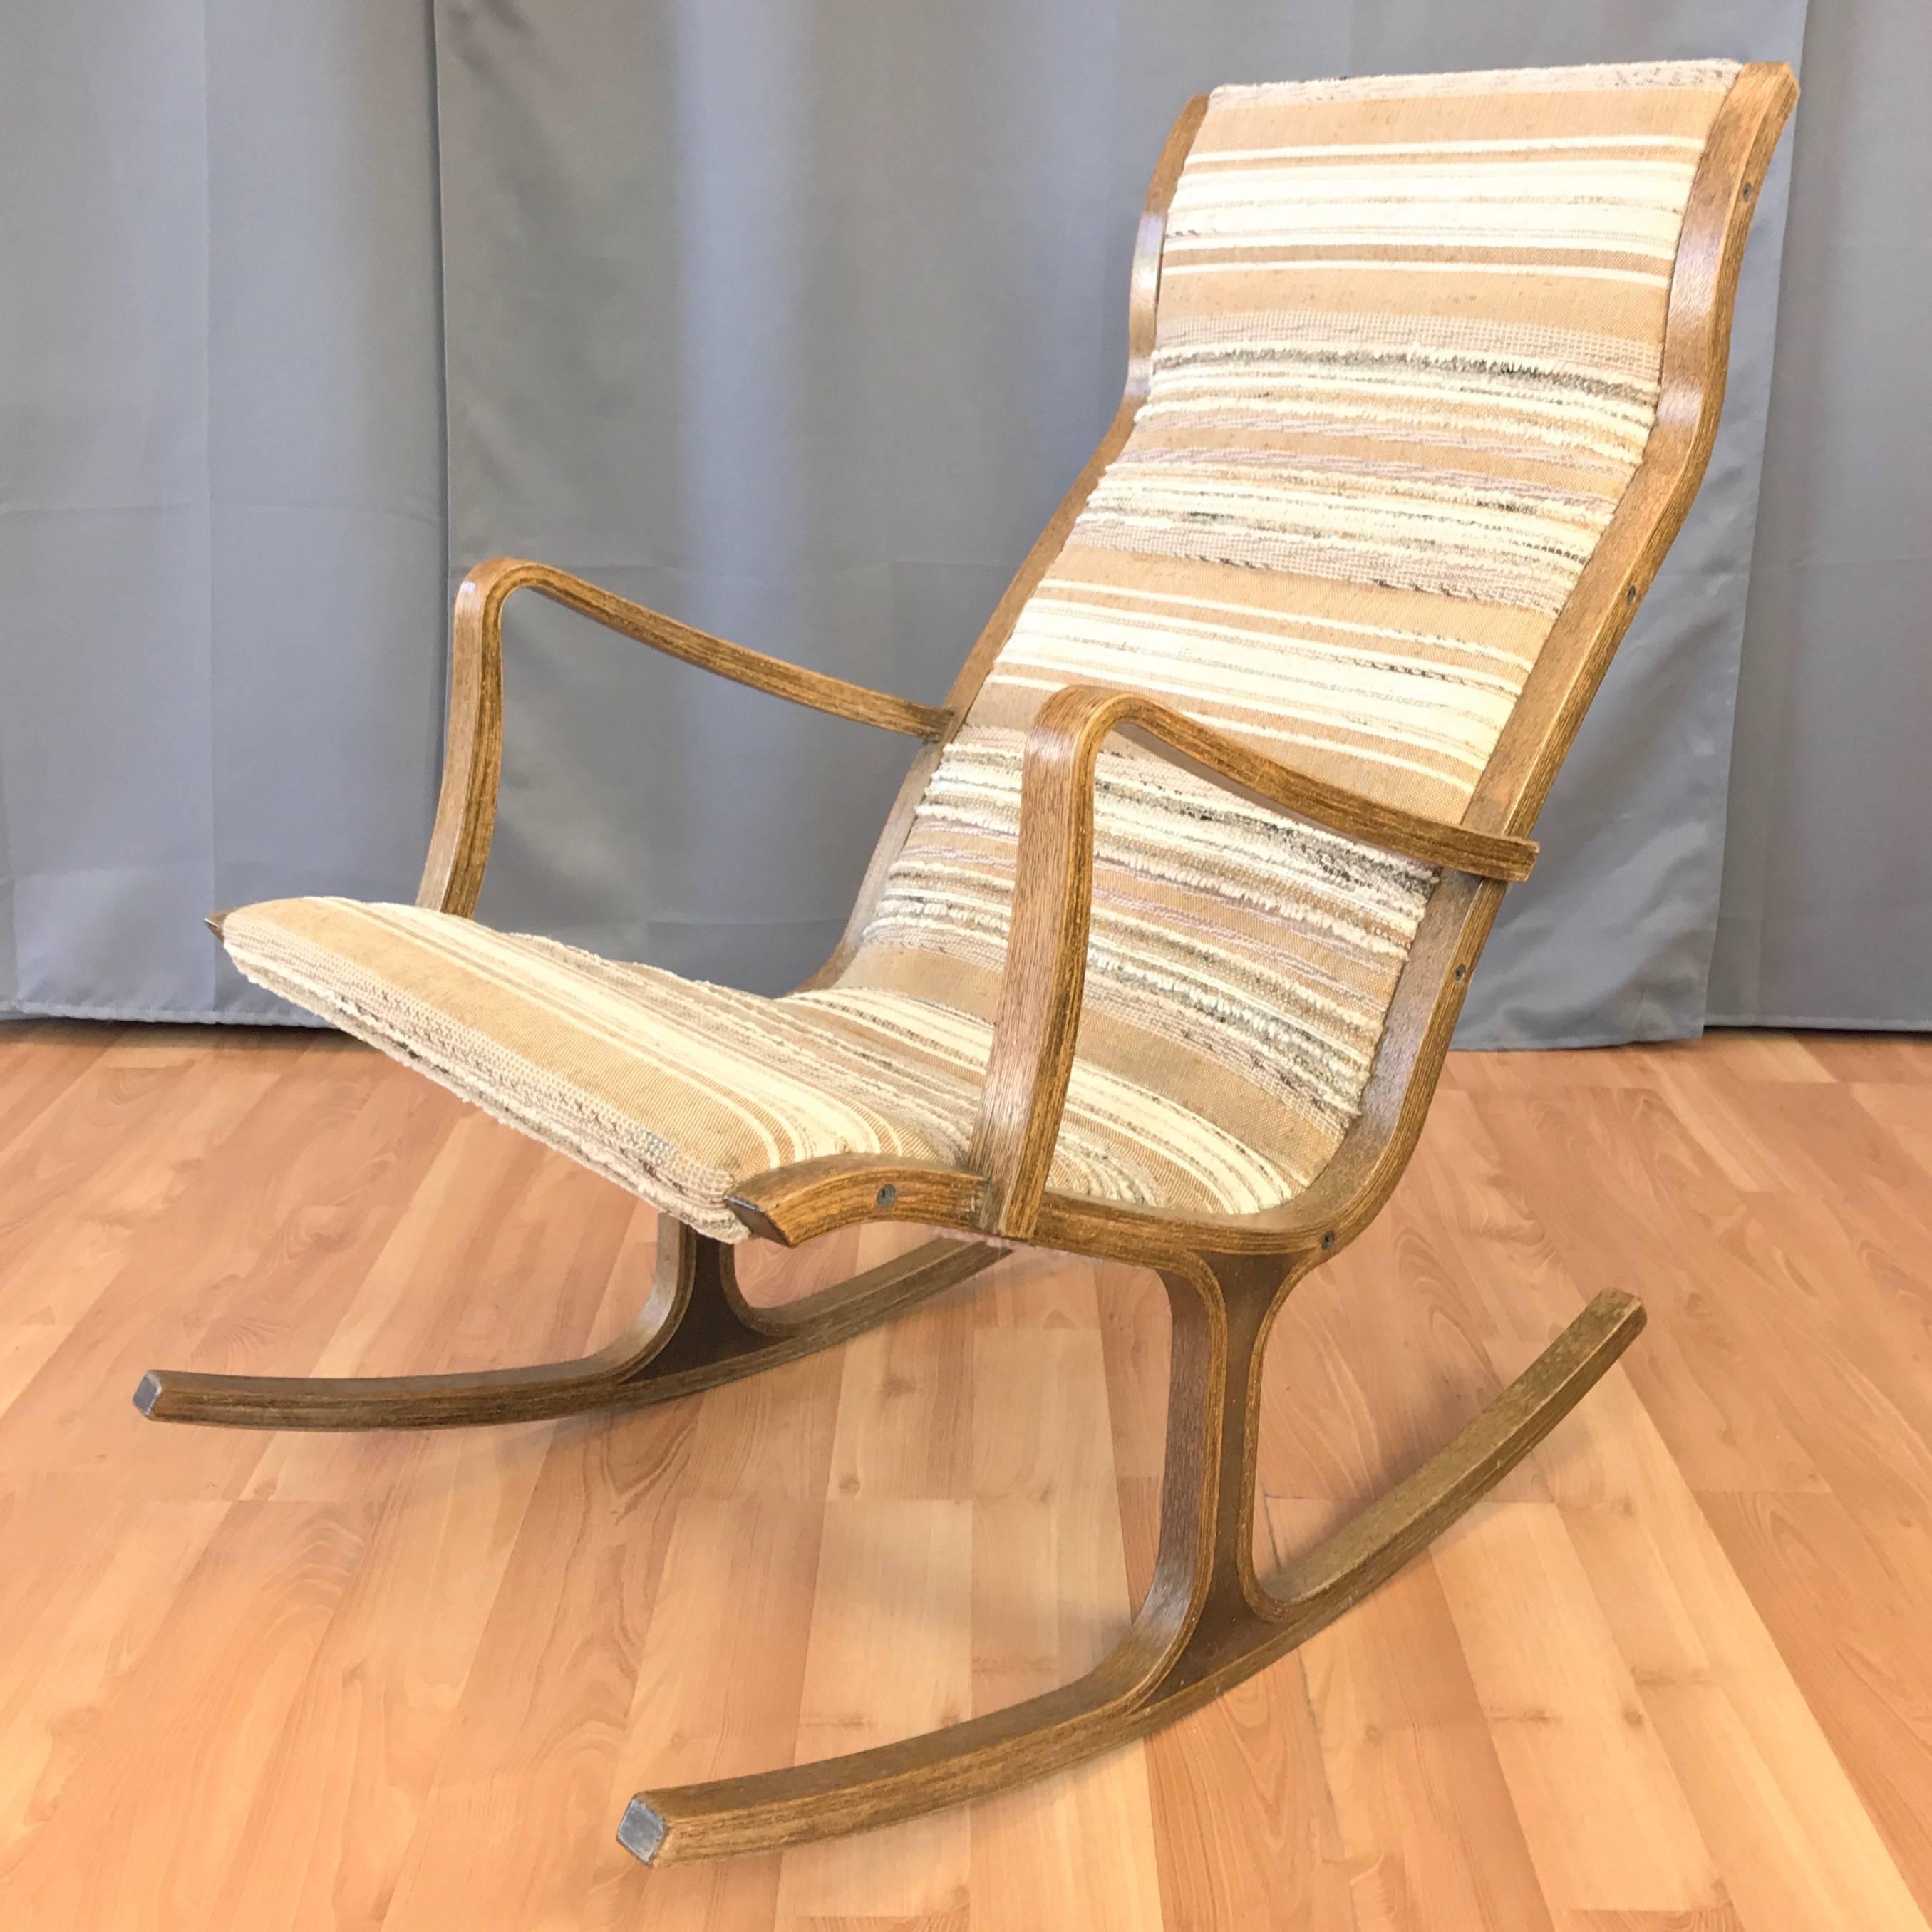 A vintage “Heron” high back oak rocking chair designed in 1966 by Mitsumasa Sugasawa for Tendo Mokko.

Rocker's thin bentwood oak frame references the lithe lines of its namesake. Ergonomic form and low profile padding create a sinuous silhouette